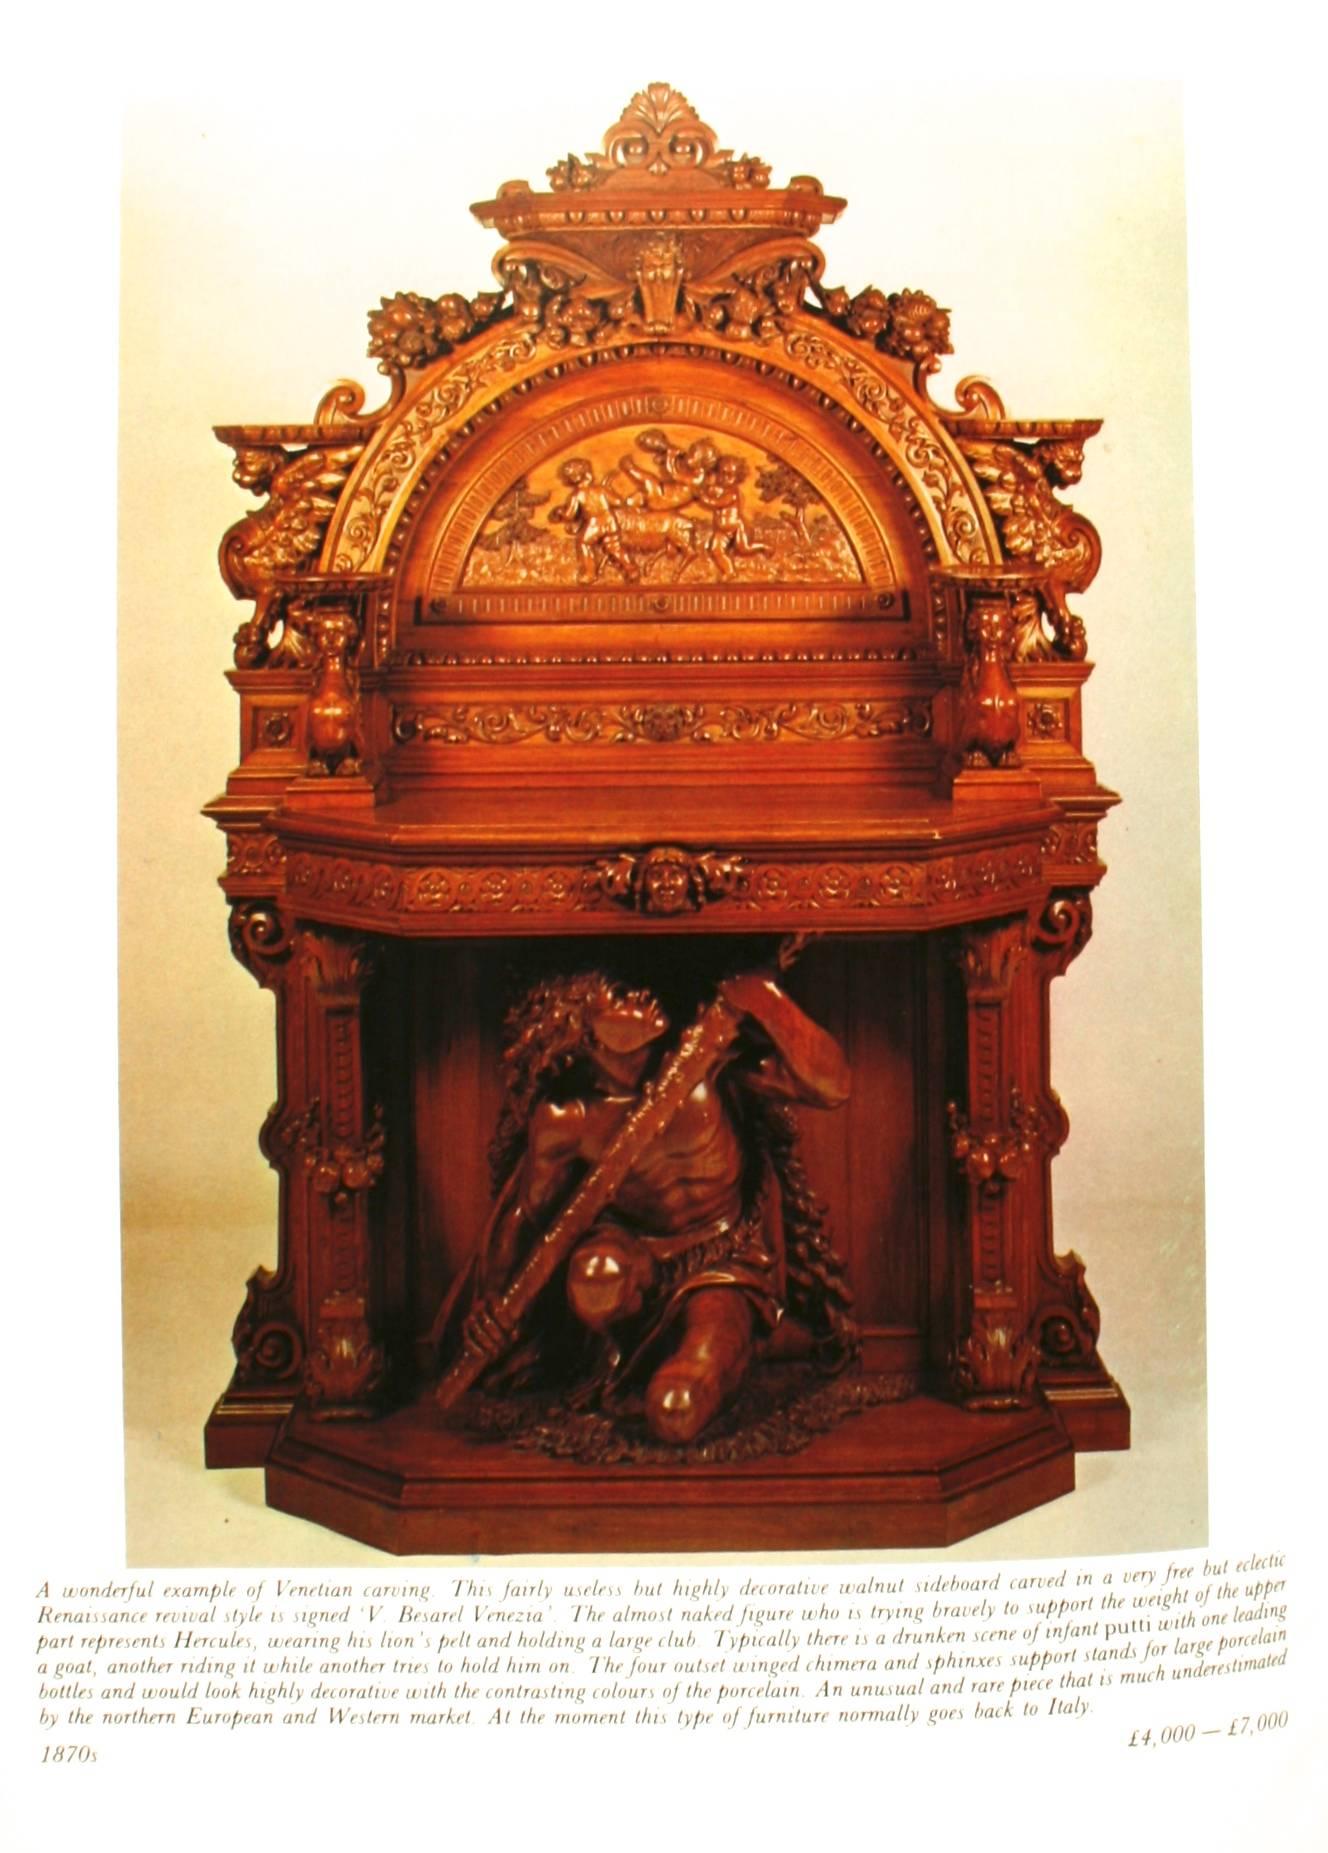 Price Guide to 19th Century European Furniture, First Edition 1